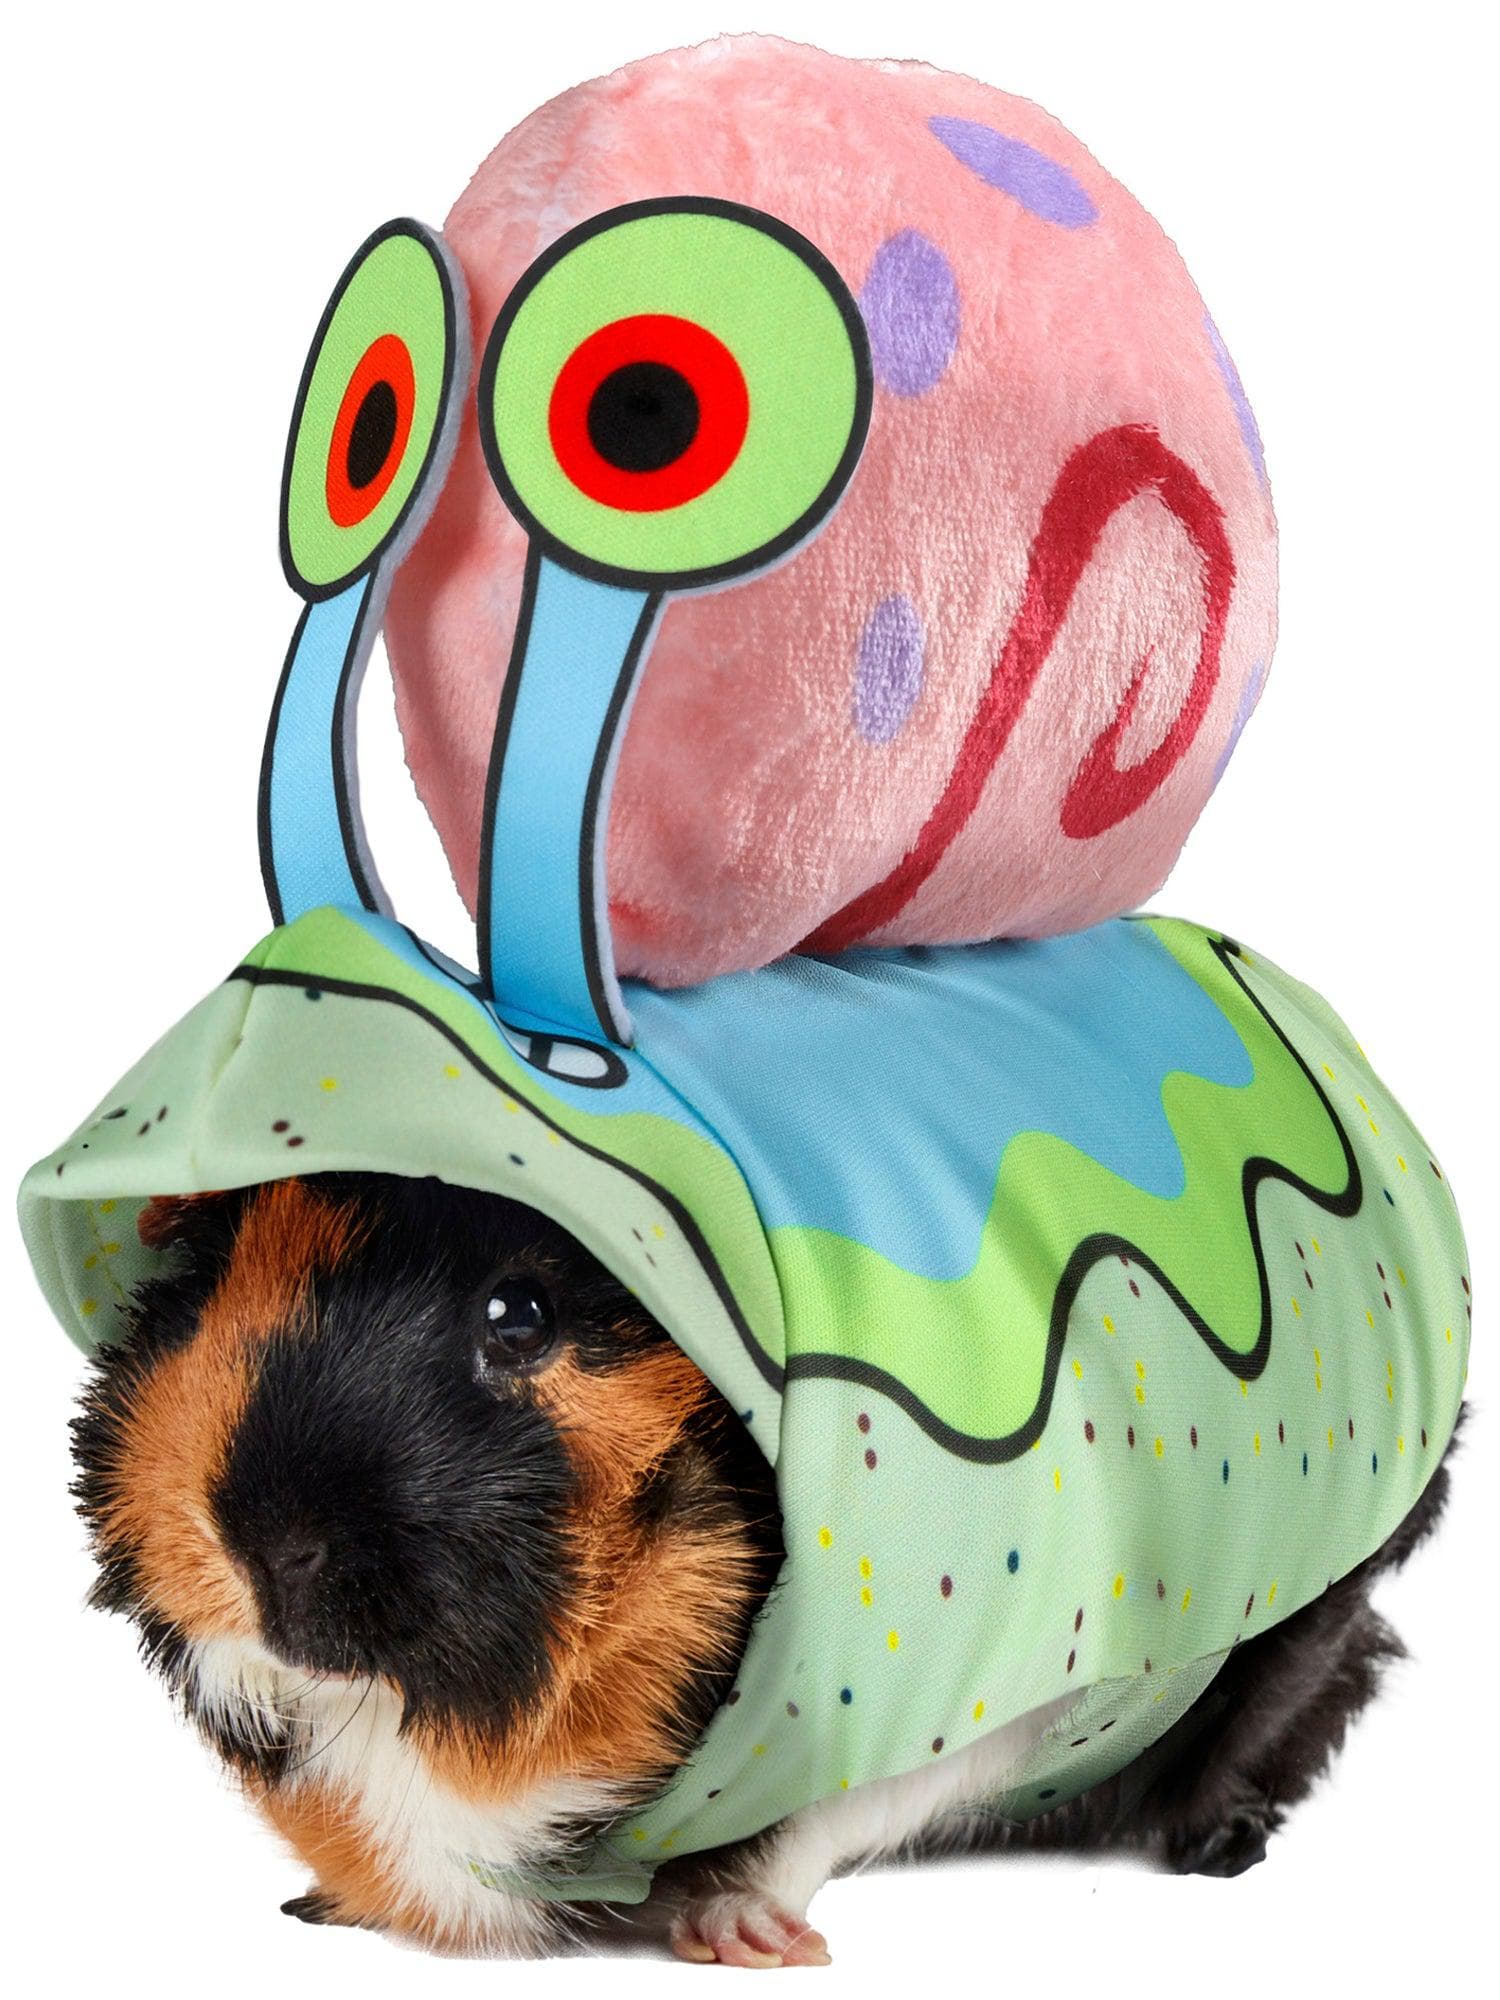 PetSmart Is Selling Adorable Tiny Guinea Pig Halloween Costumes